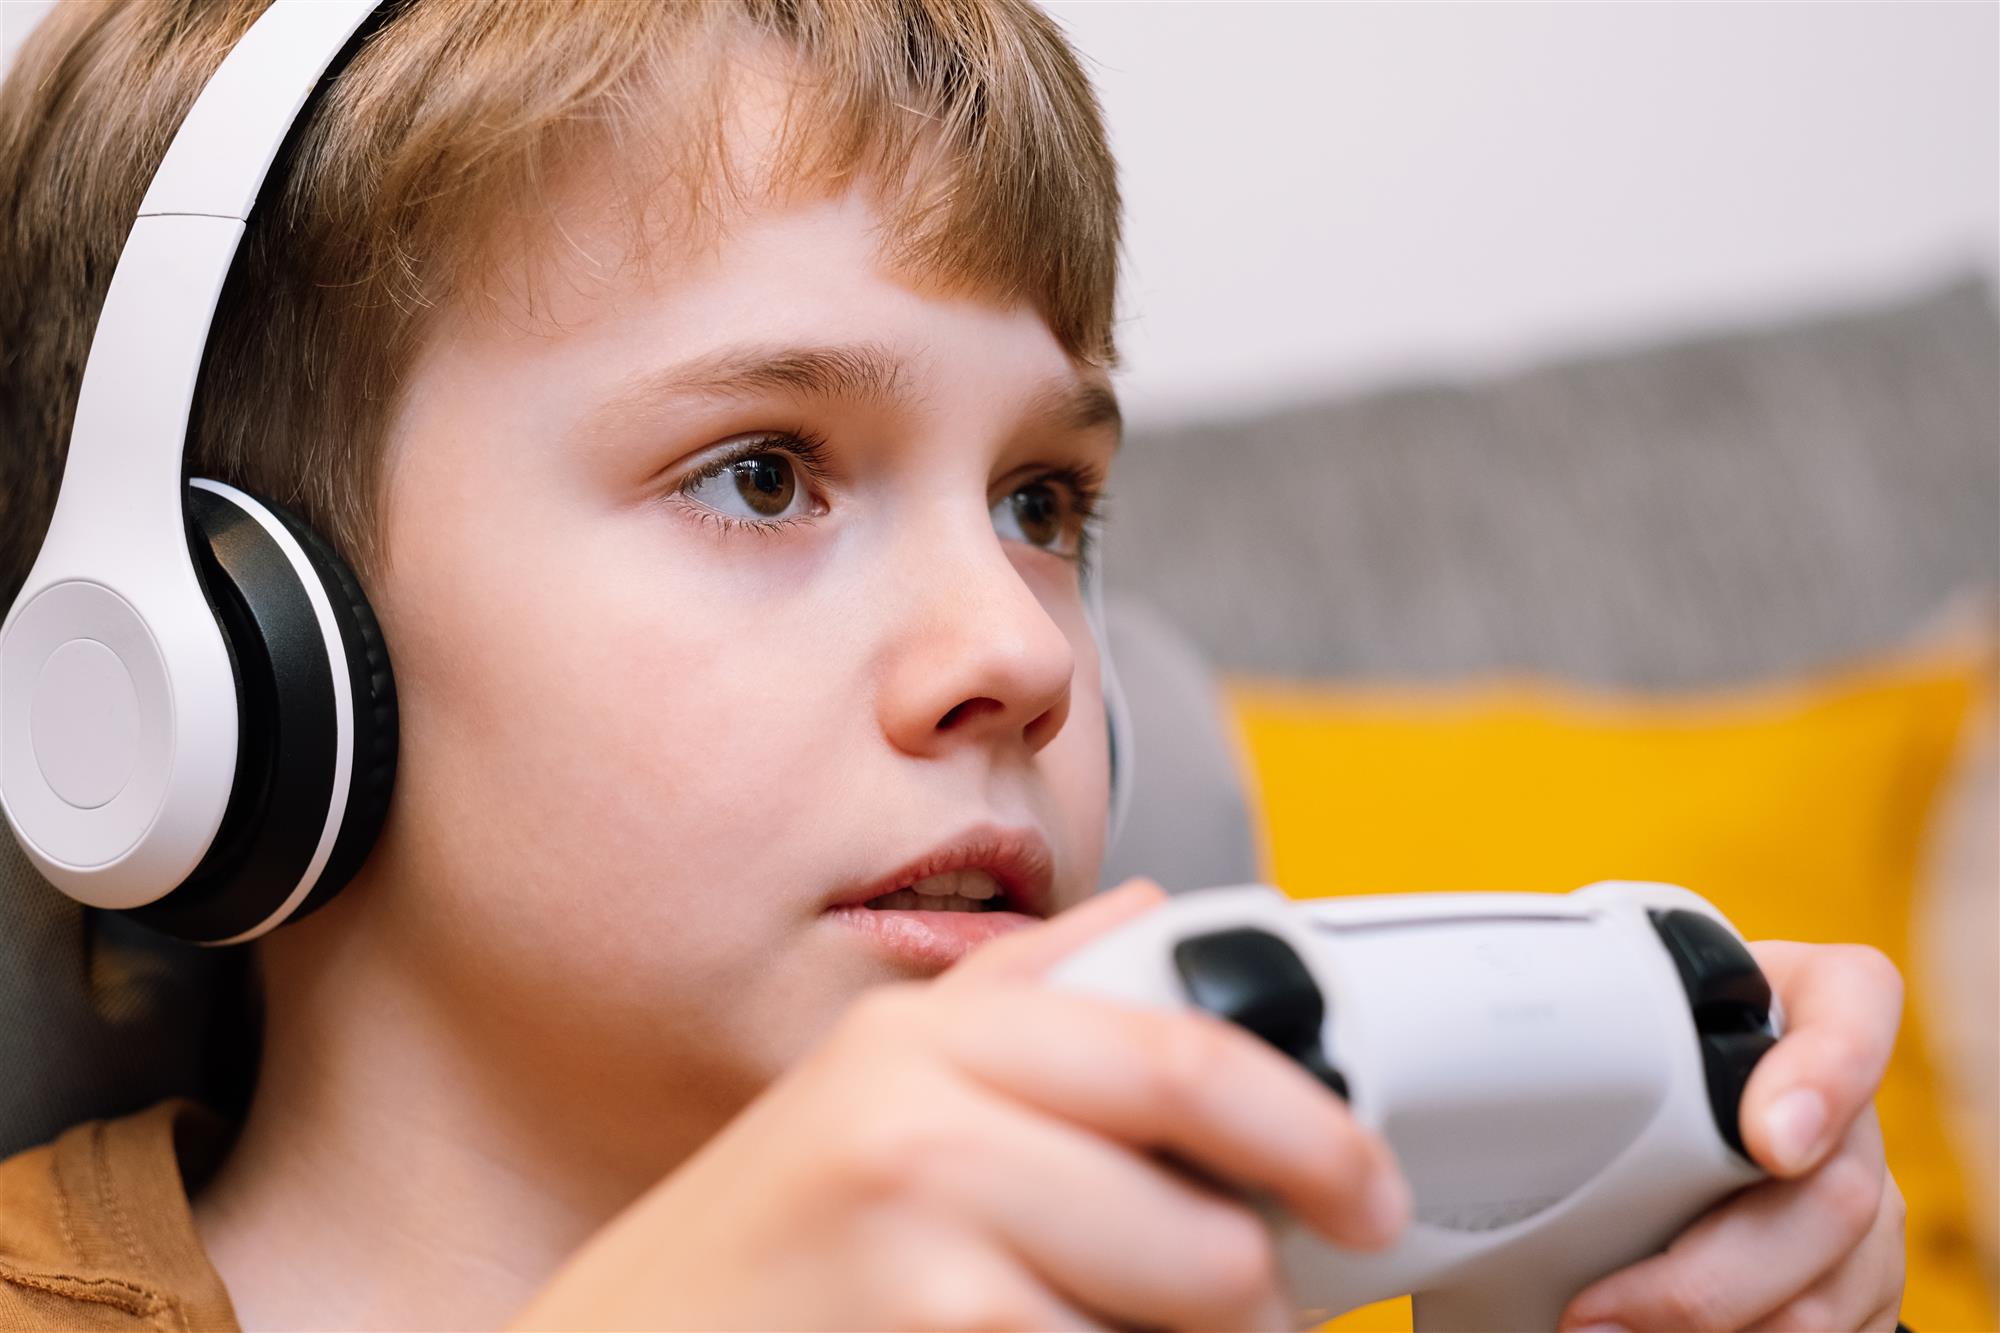 Effects of video games on your child's vision